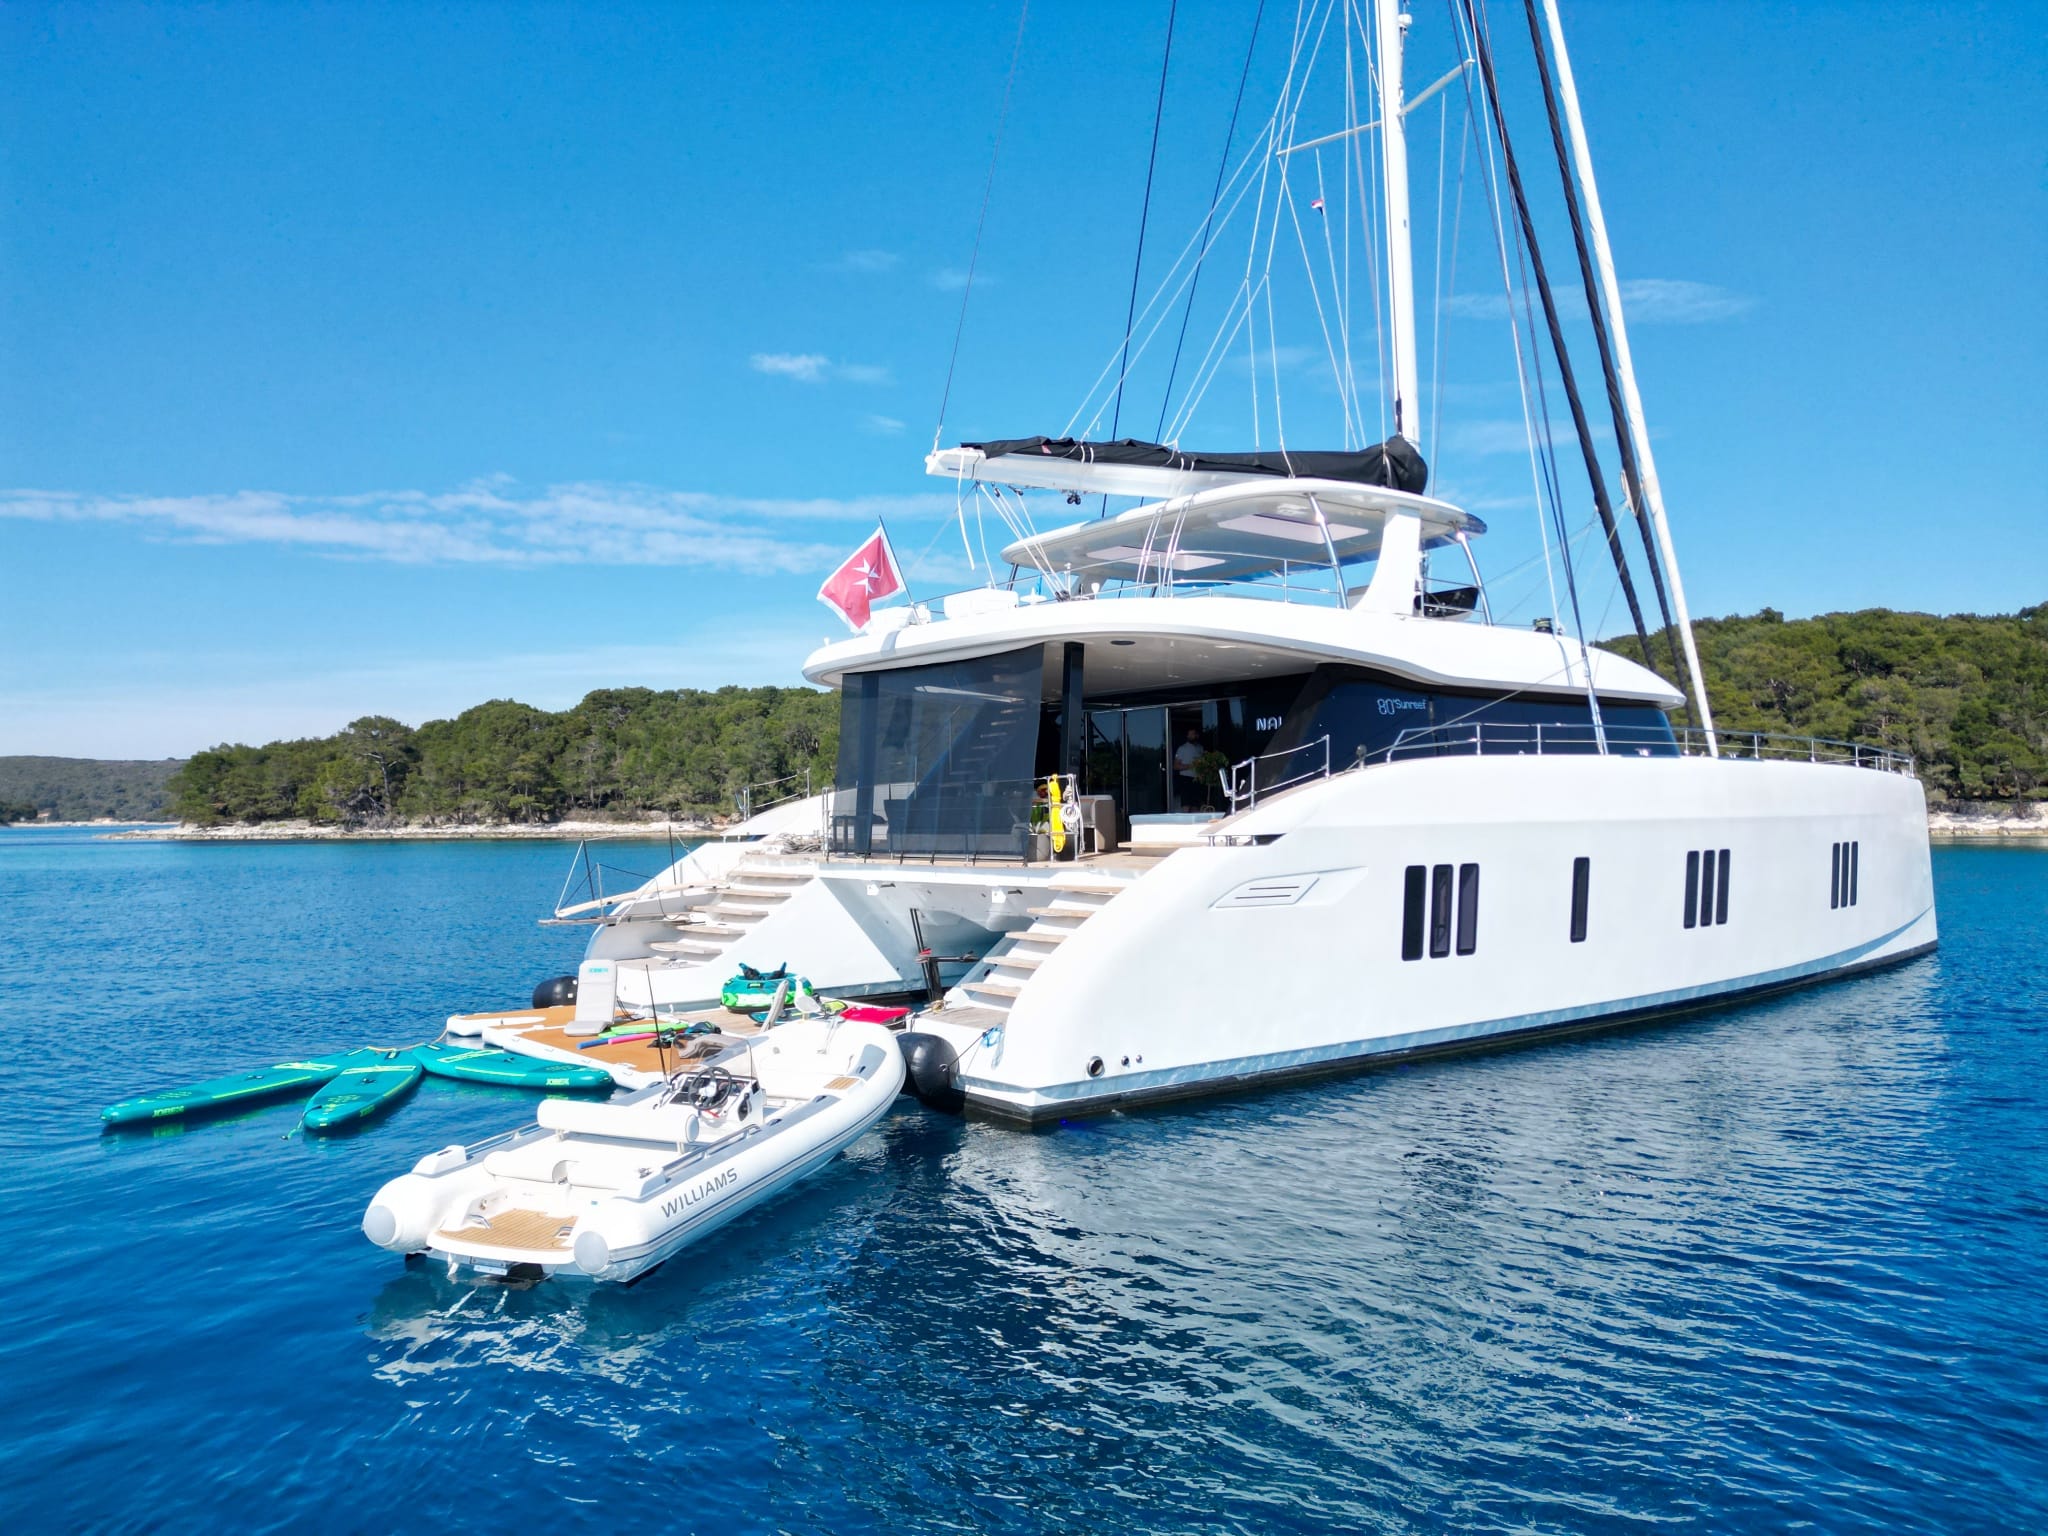 Sunreef 80 for charter in croatia with floating beach and water toys